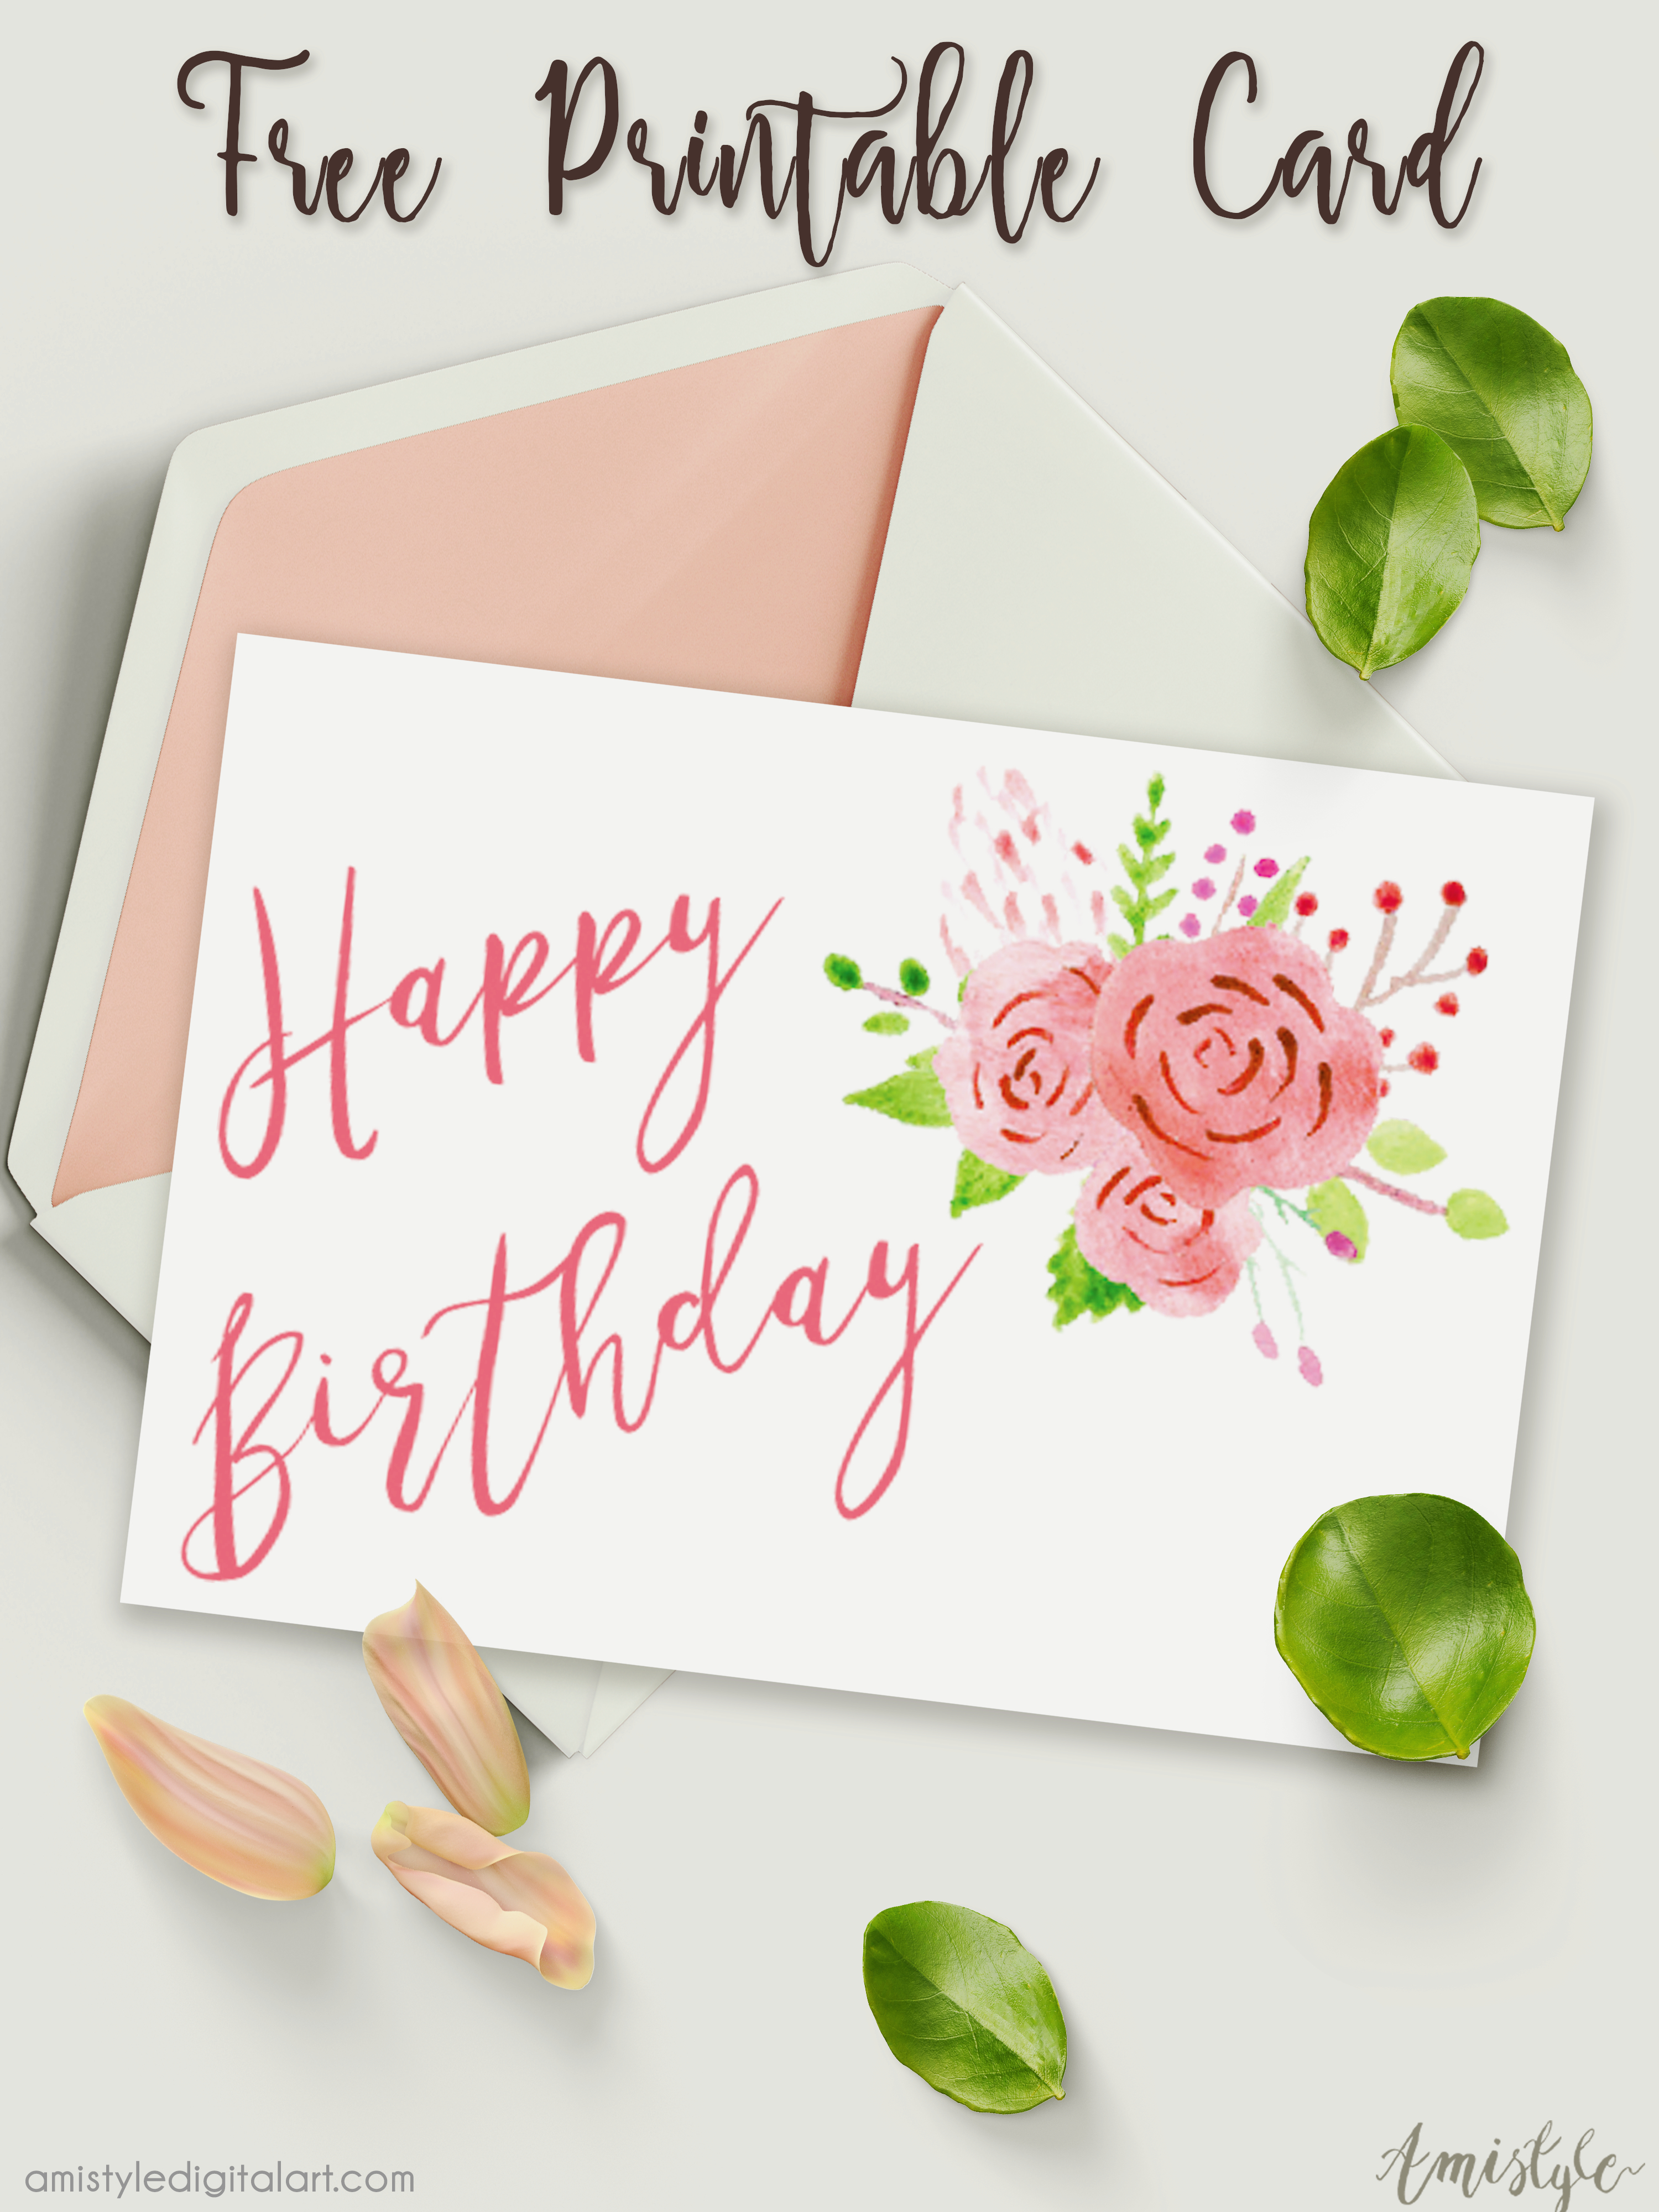 Free Printable Birthday Card With Watercolor Floral Design - Free Printable Personalized Birthday Cards